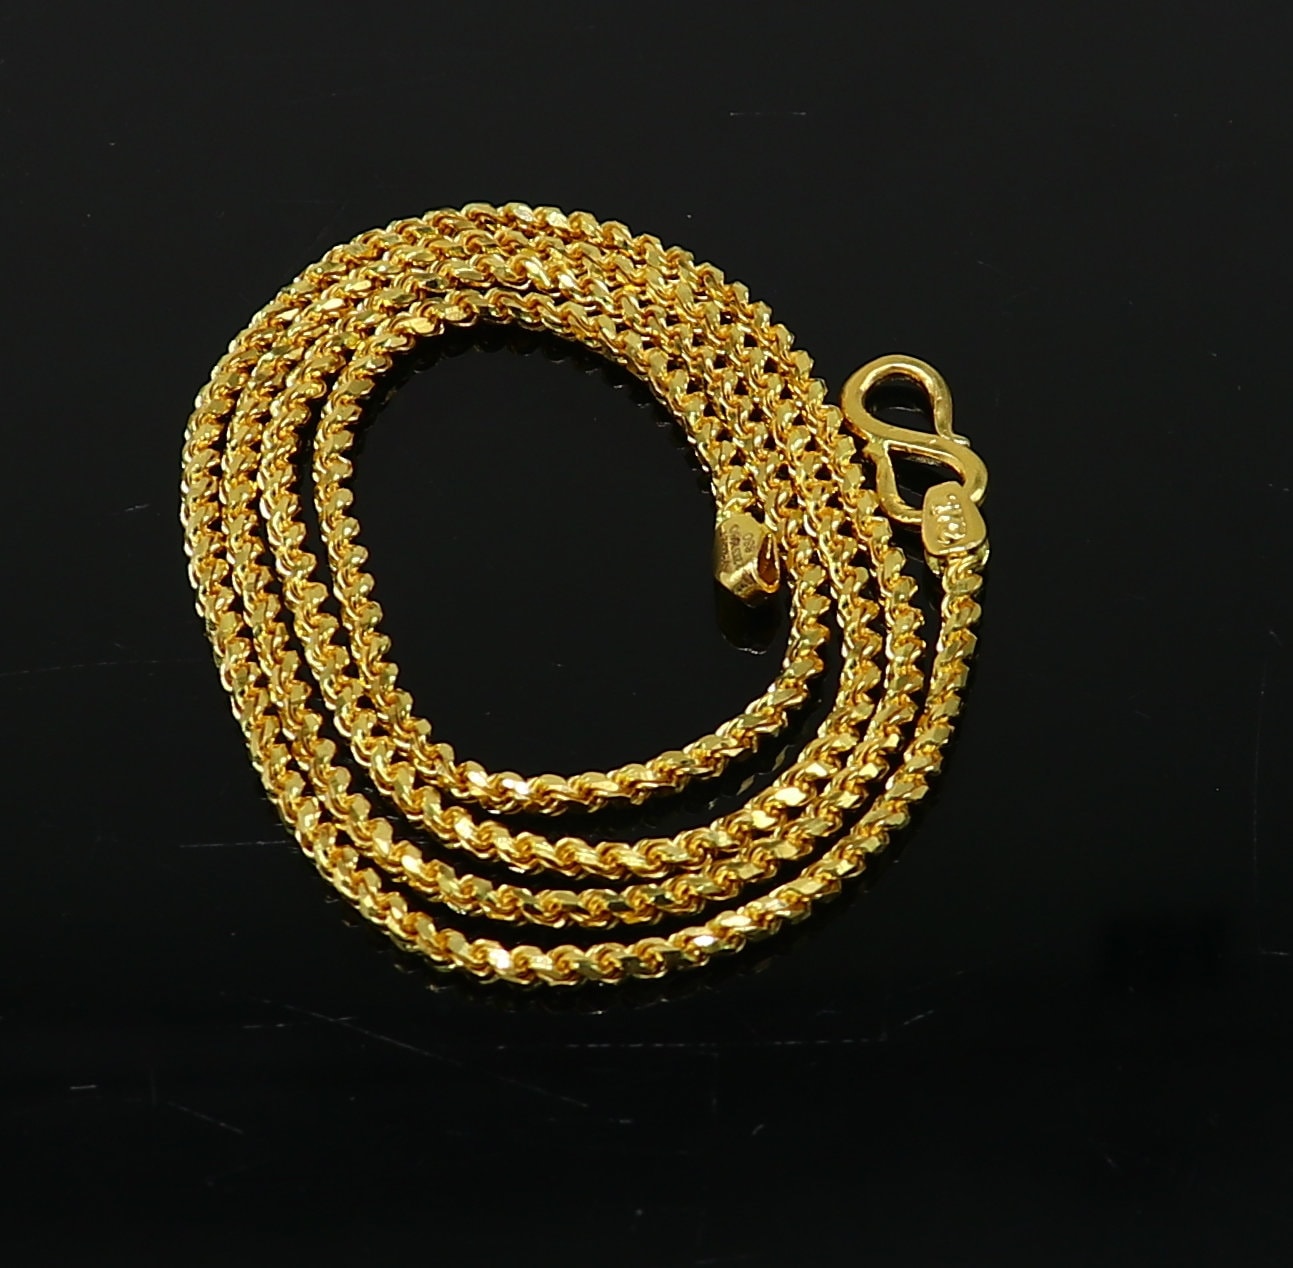 Solid 22k yellow gold handmade fabulous Rope chain necklace excellent gold unisex chain certified best gifting jewelry men's girls gch578 - TRIBAL ORNAMENTS